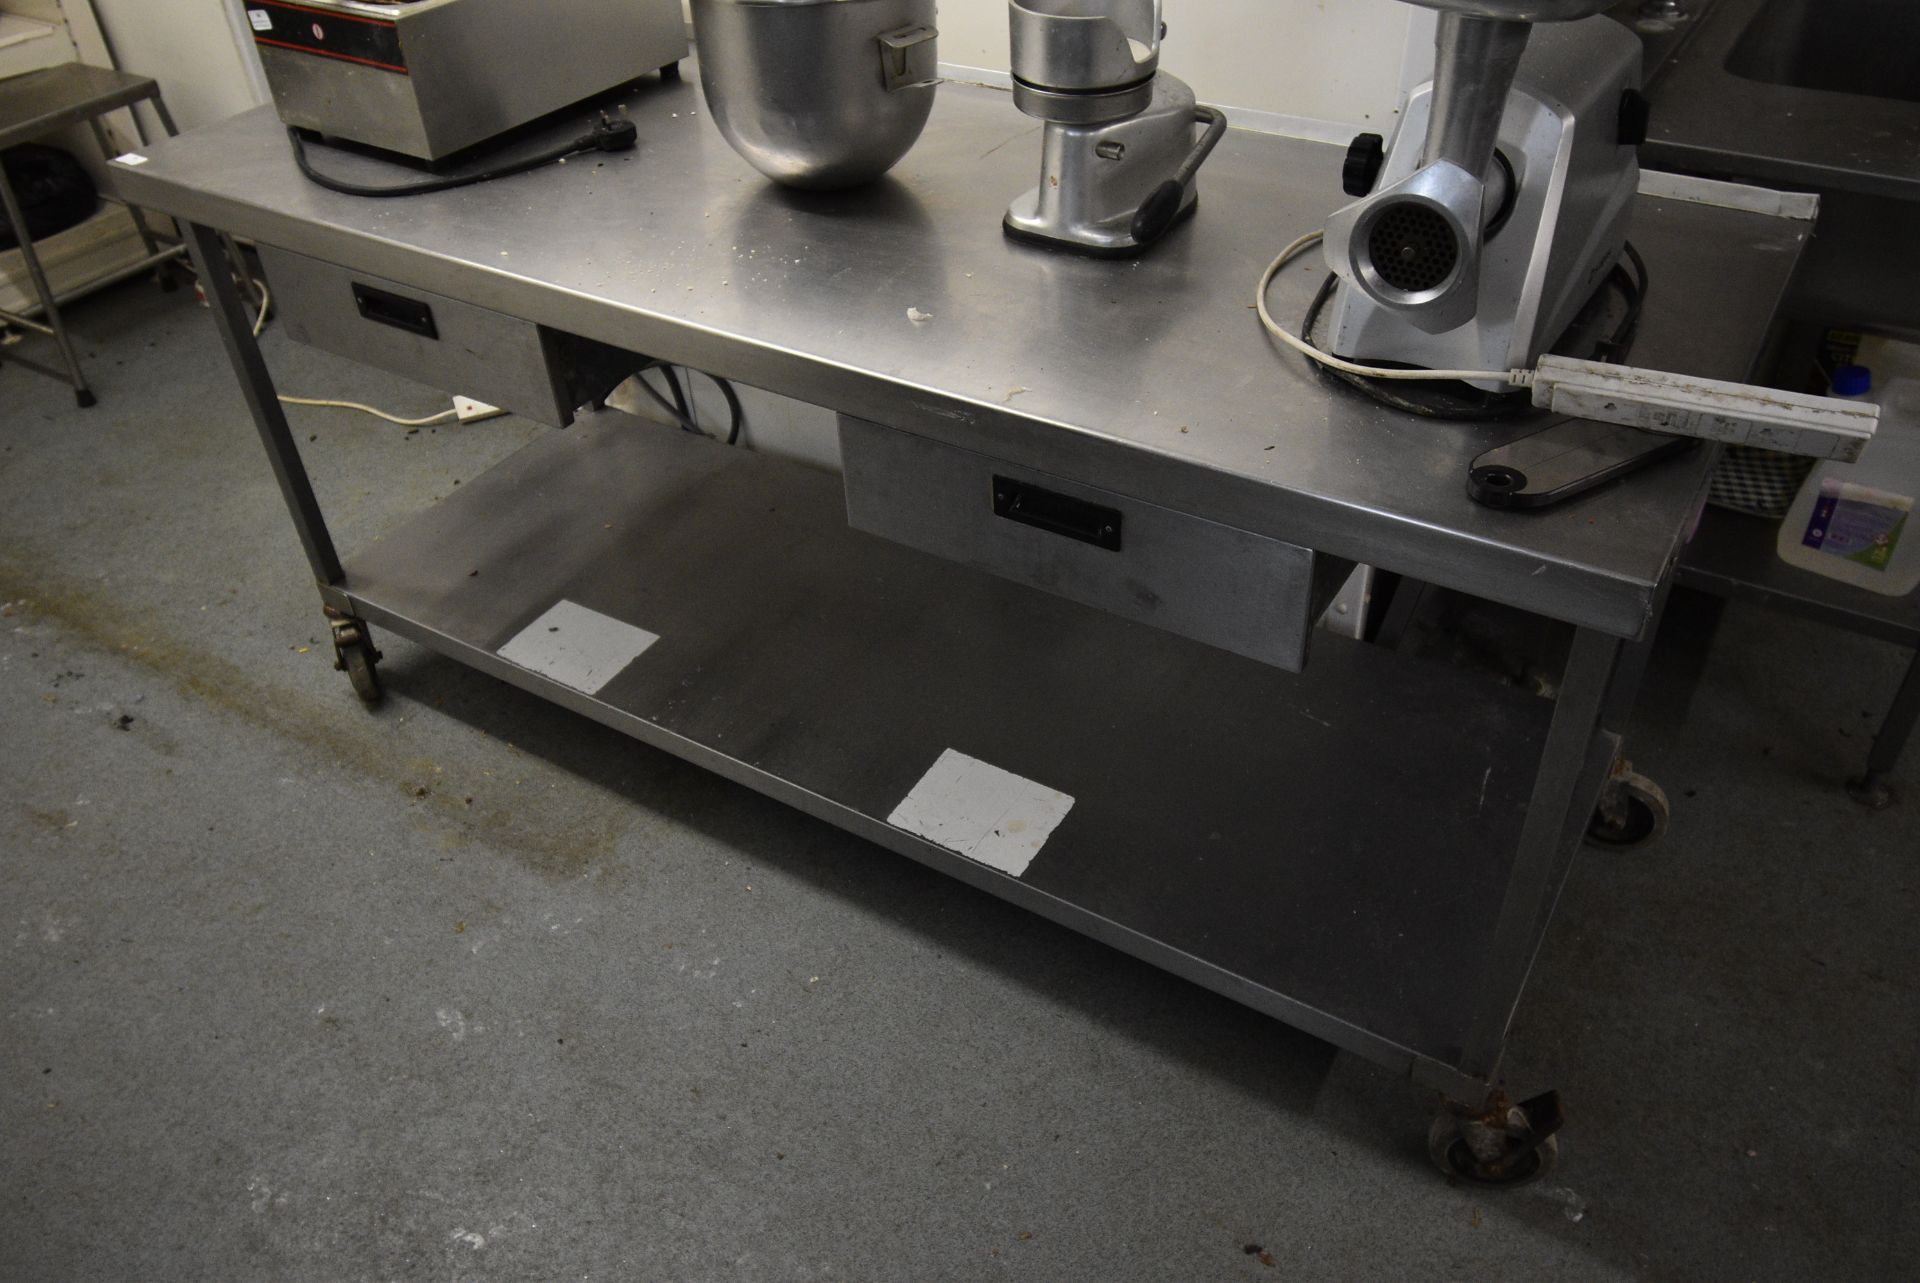 Stainless Steel Mobile Preparation Table with Undershelf and Two Drawers 180x70cm x 85cm high